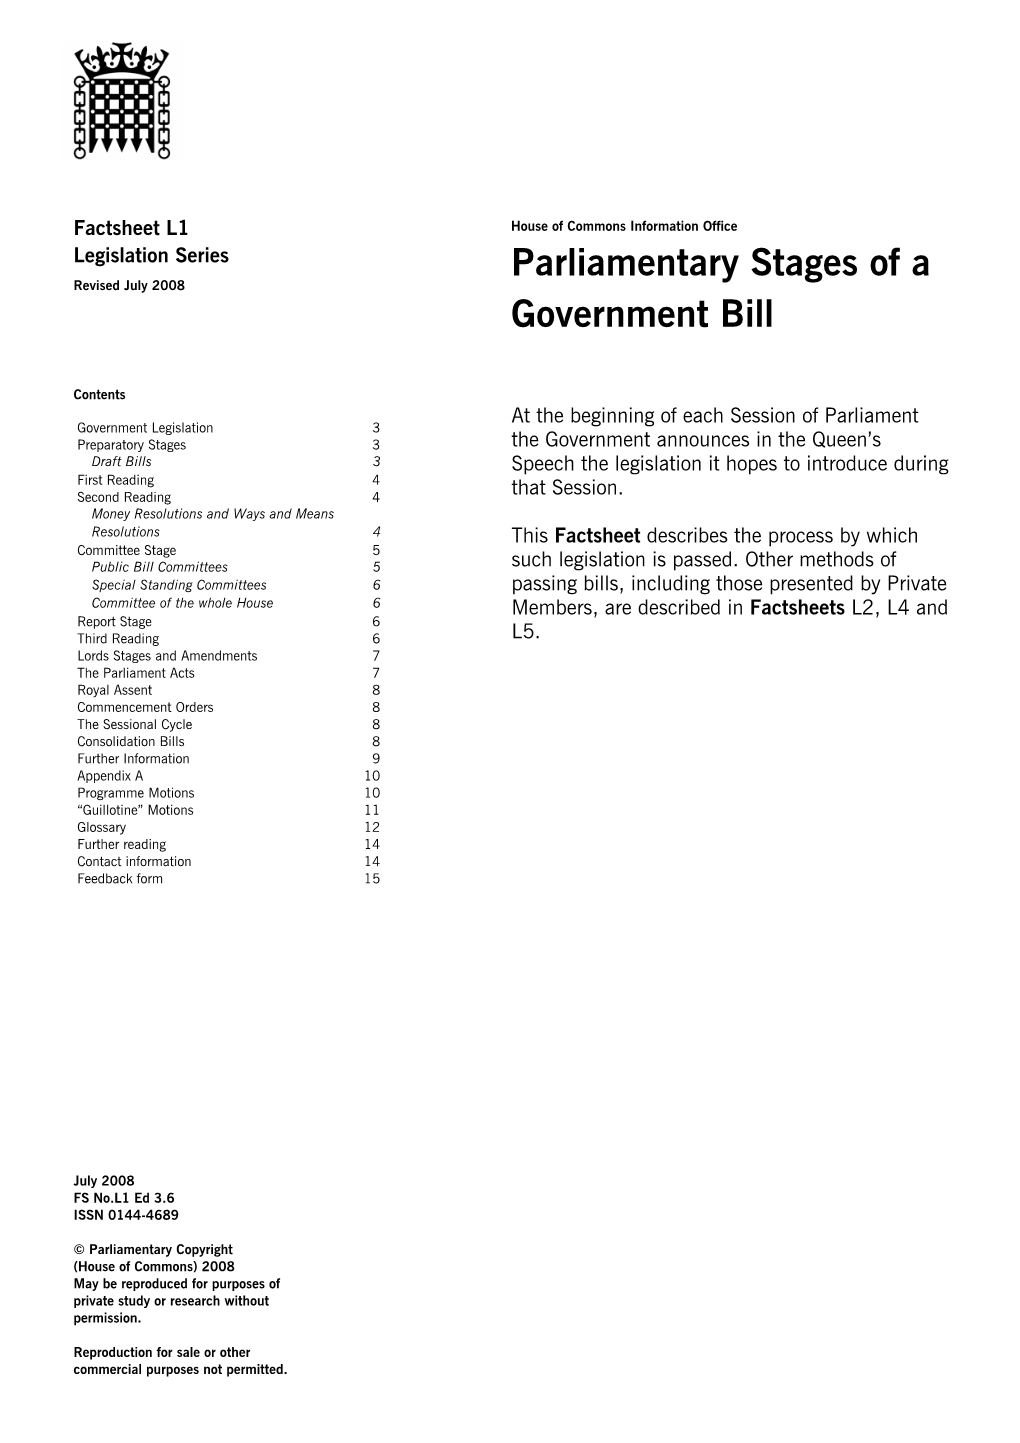 Parliamentary Stages of a Government Bill House of Commons 3 Information Office Factsheet L1